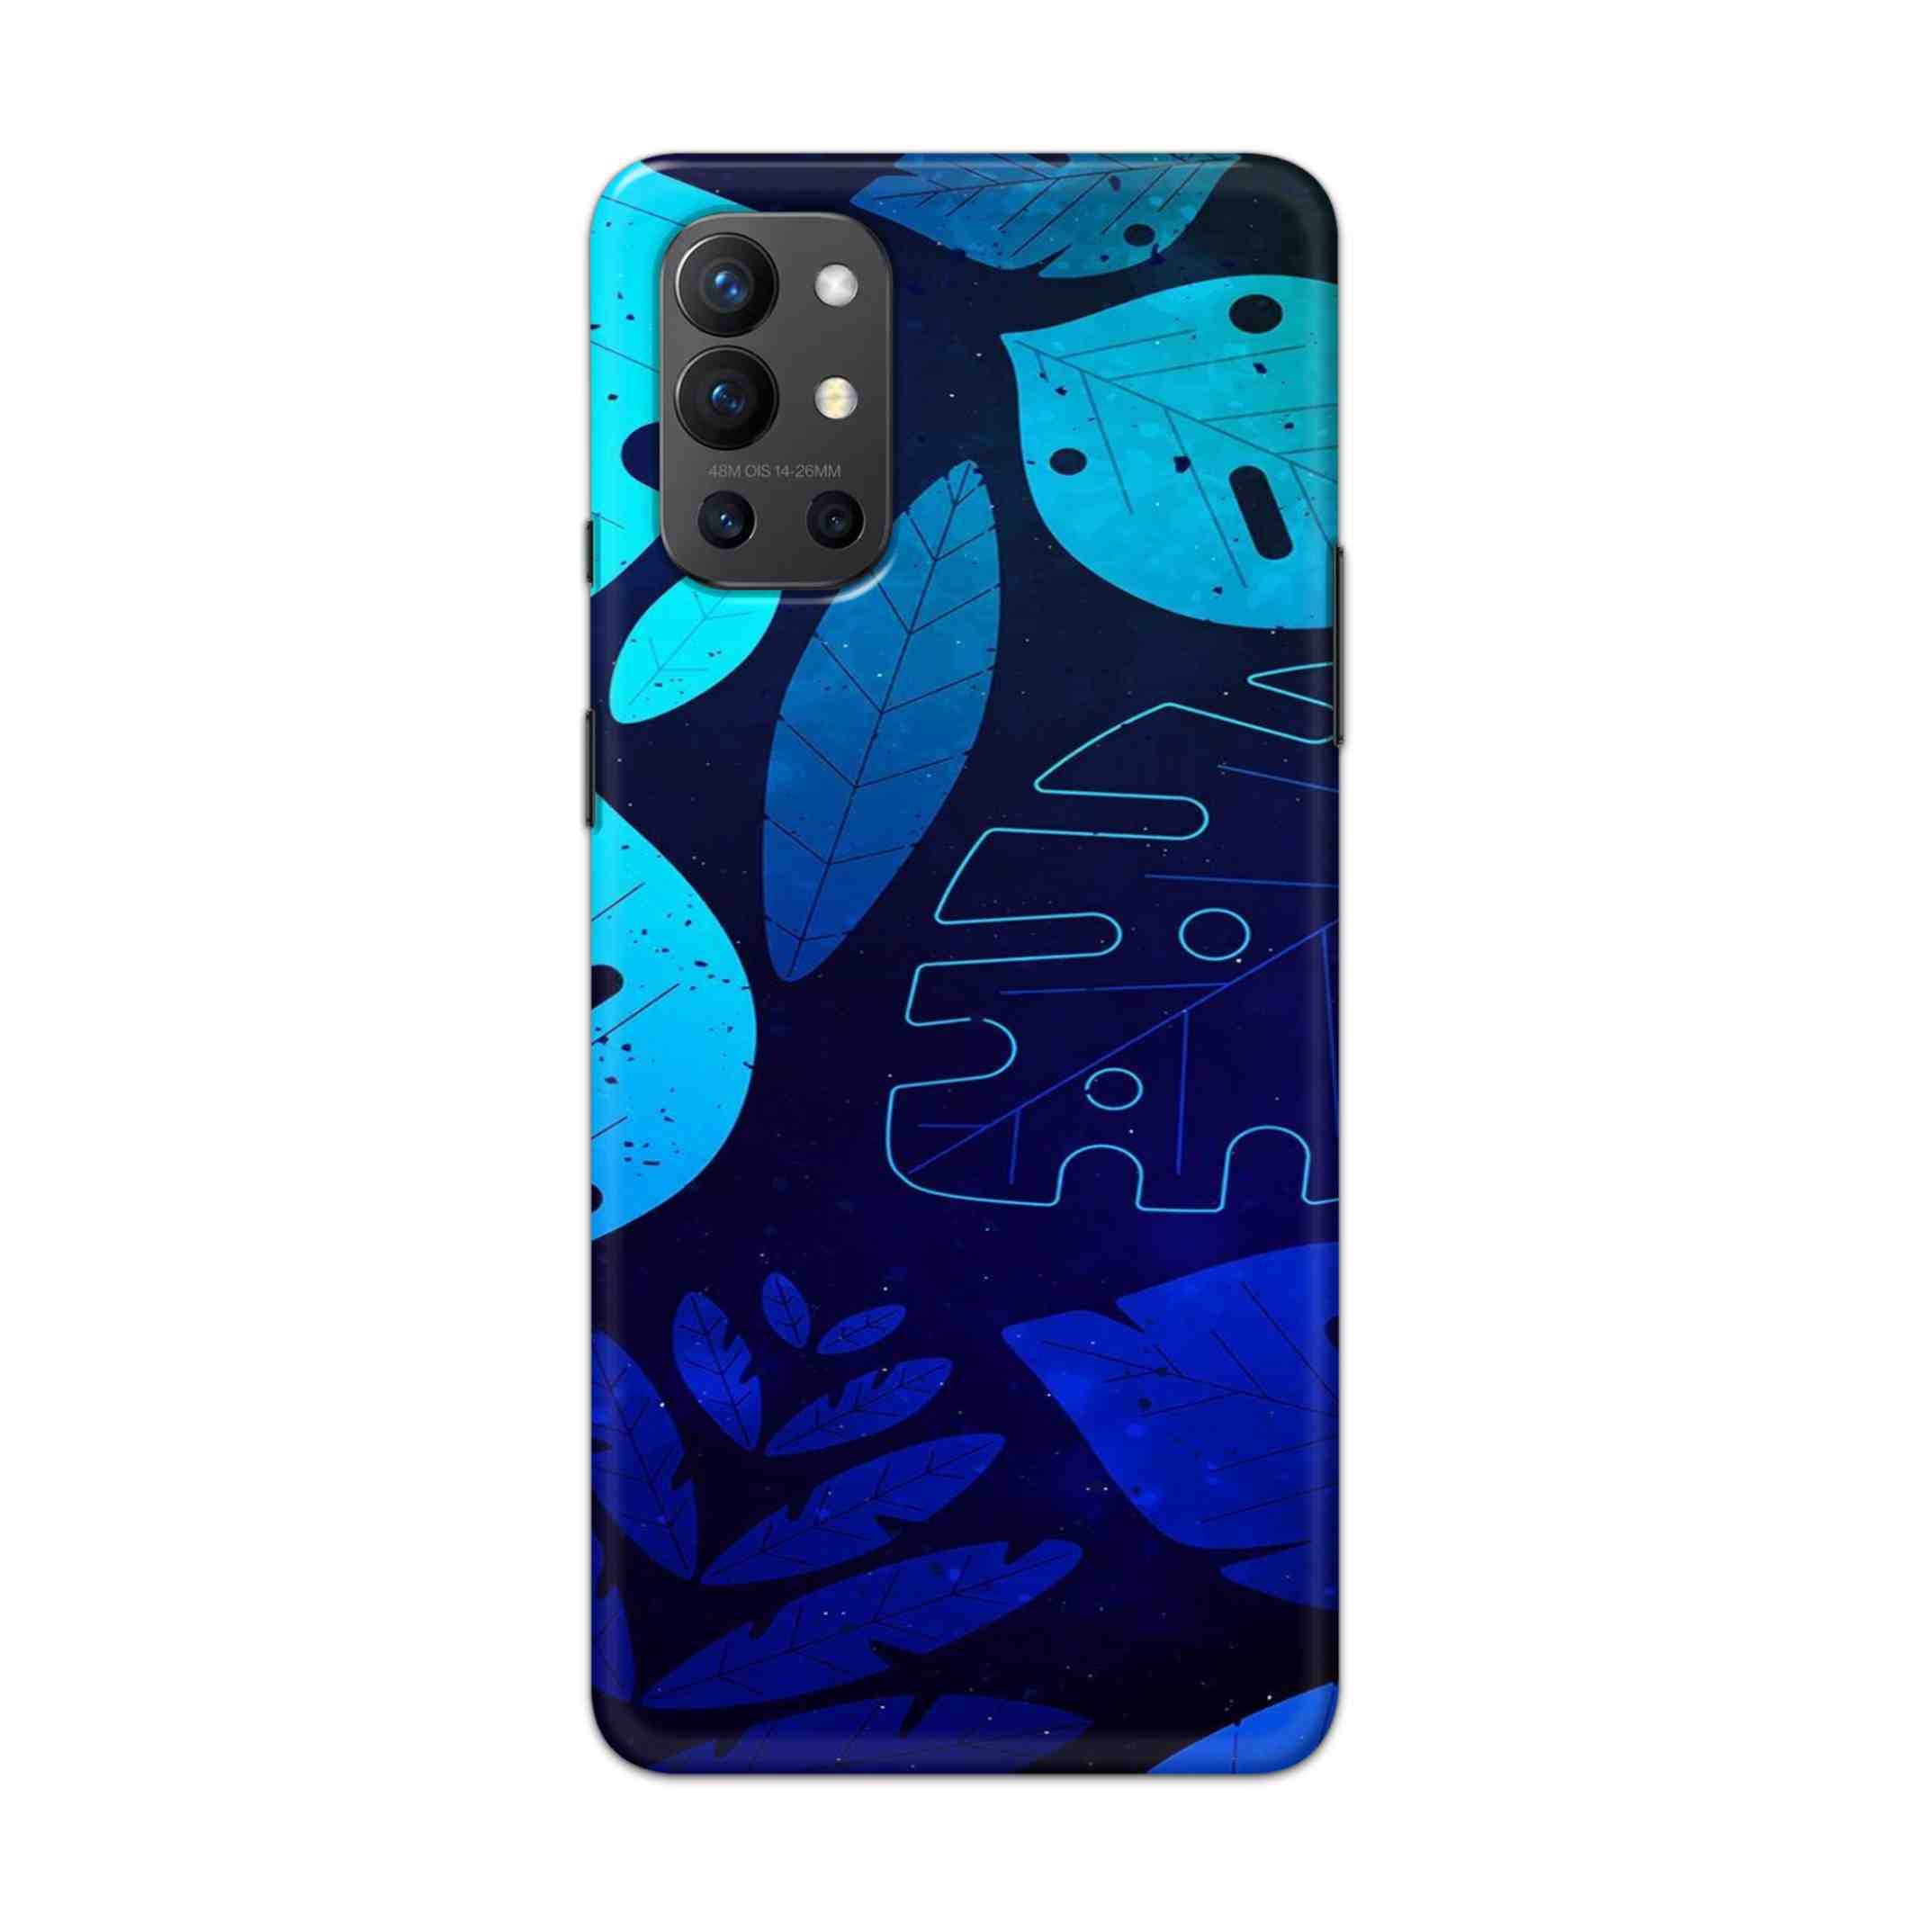 Buy Neon Leaf Hard Back Mobile Phone Case Cover For OnePlus 9R / 8T Online